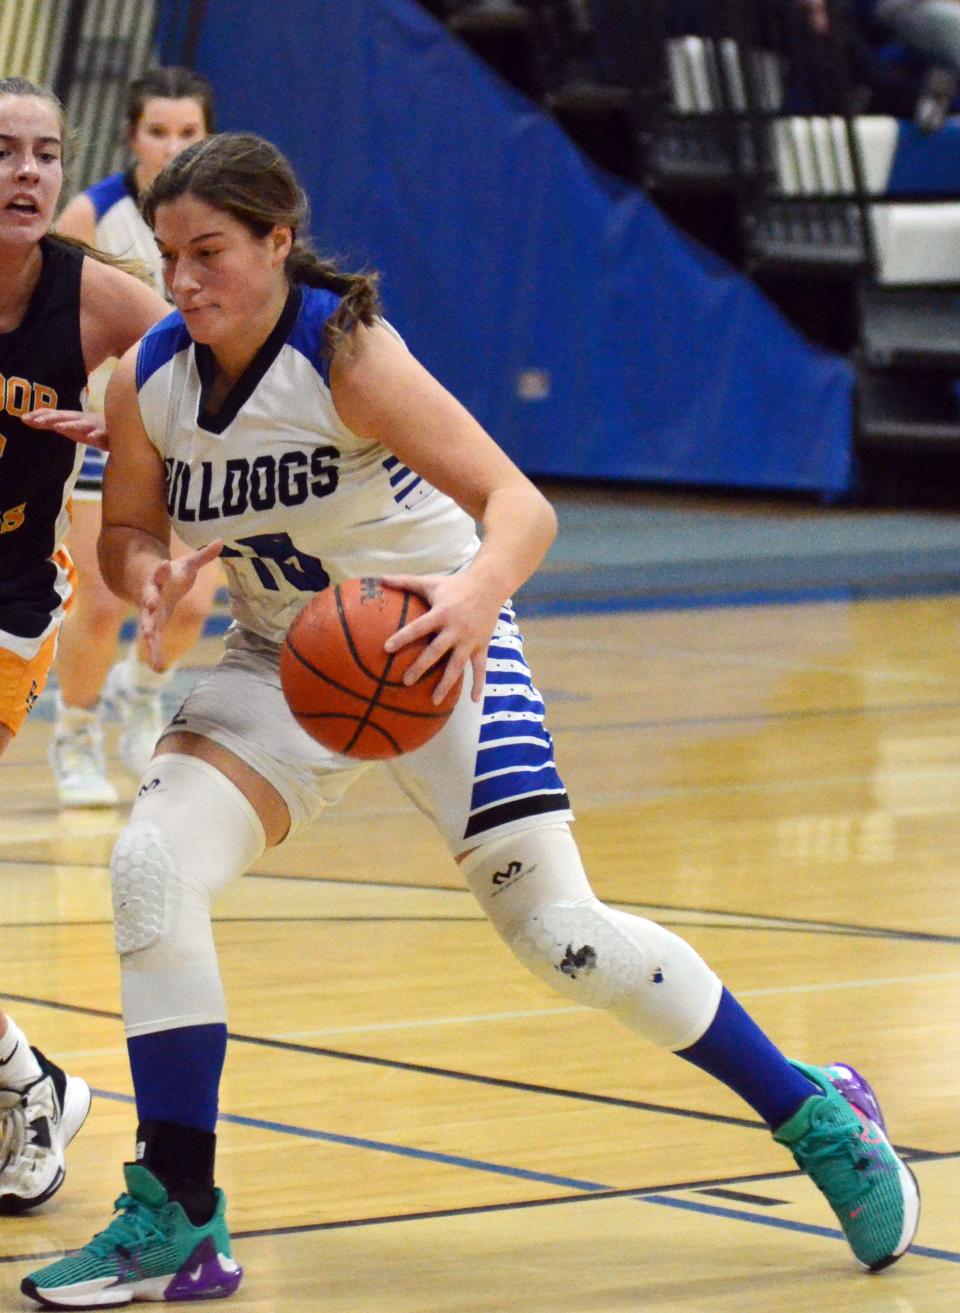 Natalie Wandrie and Inland Lakes have a bracket full of teams they've yet to face, though should head in as the heavy favorite.